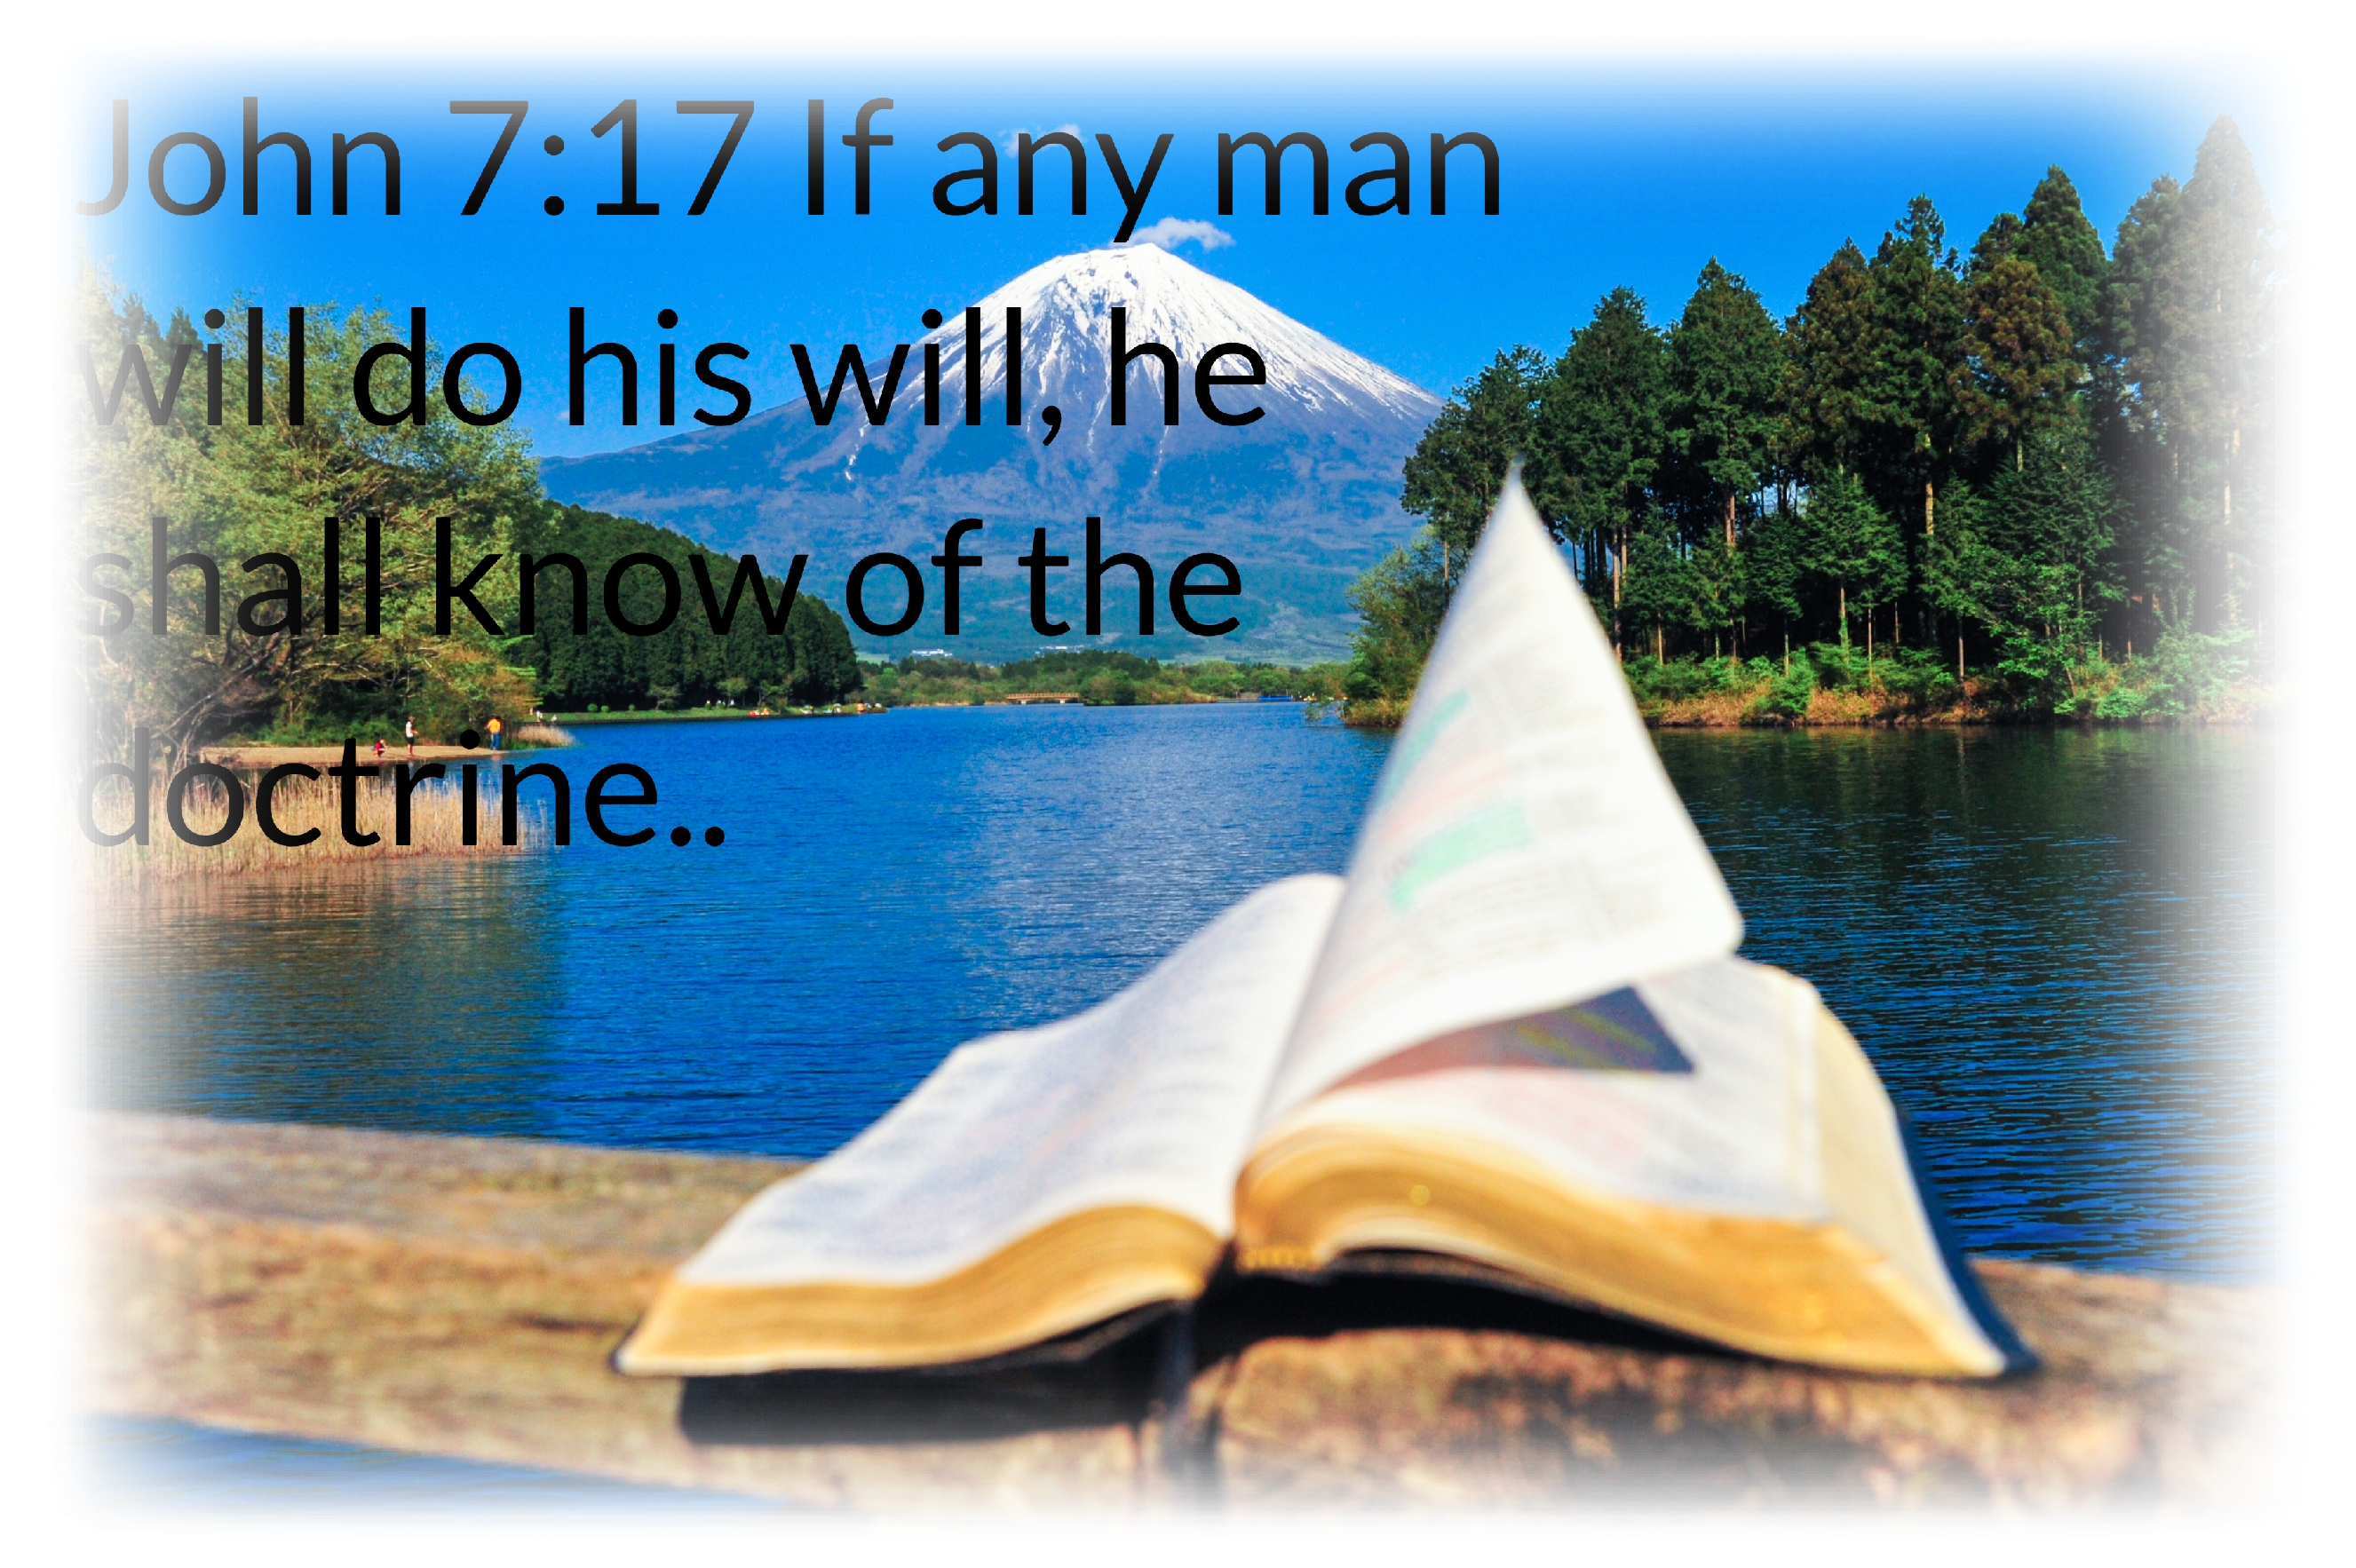 Knowledge Of God’s Word Comes Through Obedience